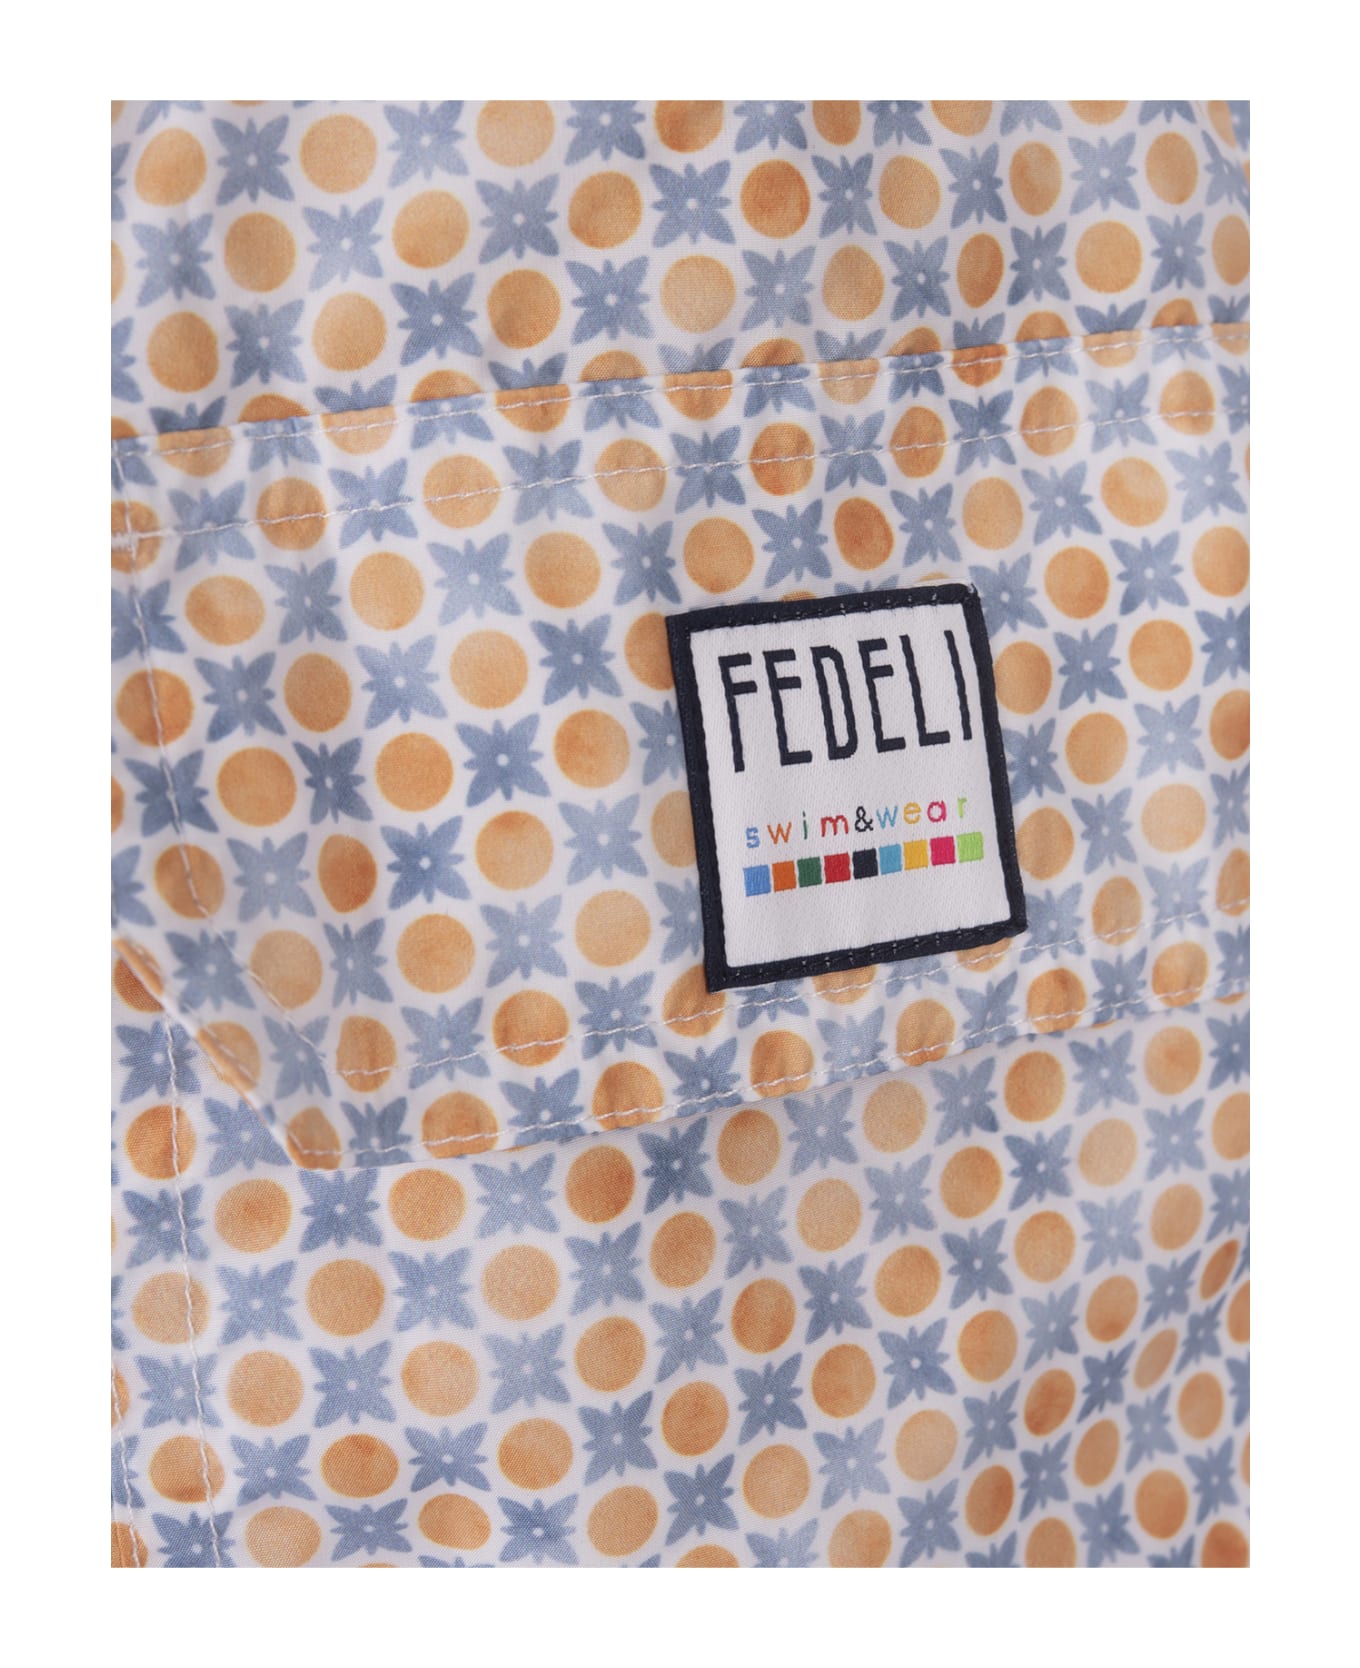 Fedeli Swim Shorts With Micro Pattern Of Polka Dots And Flowers - Orange